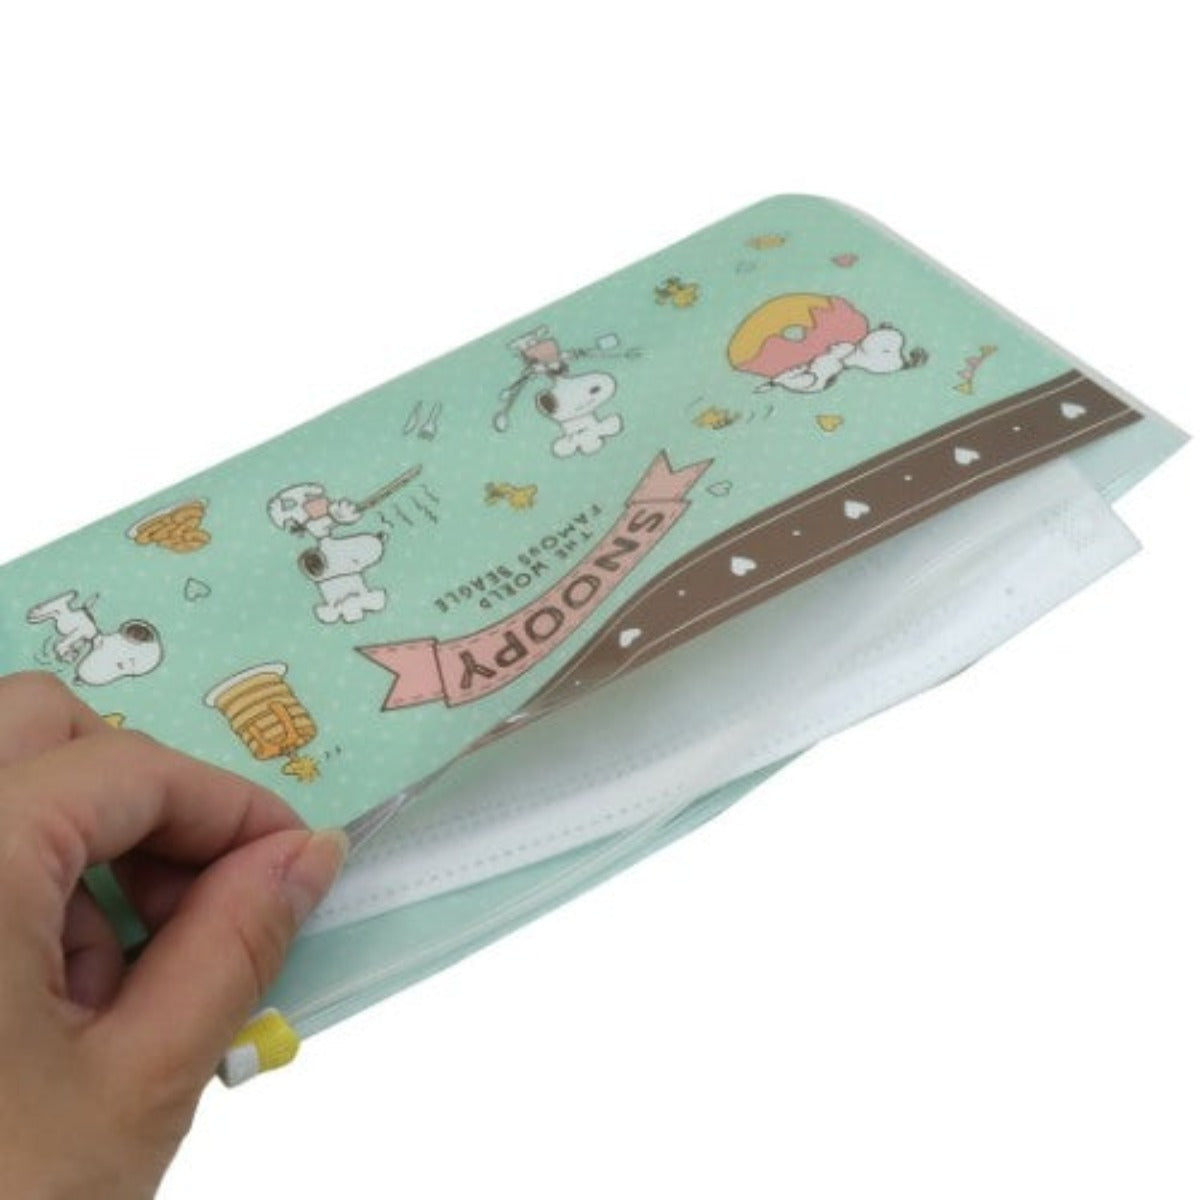 Snoopy Mask Pouch Flat Cake Gree